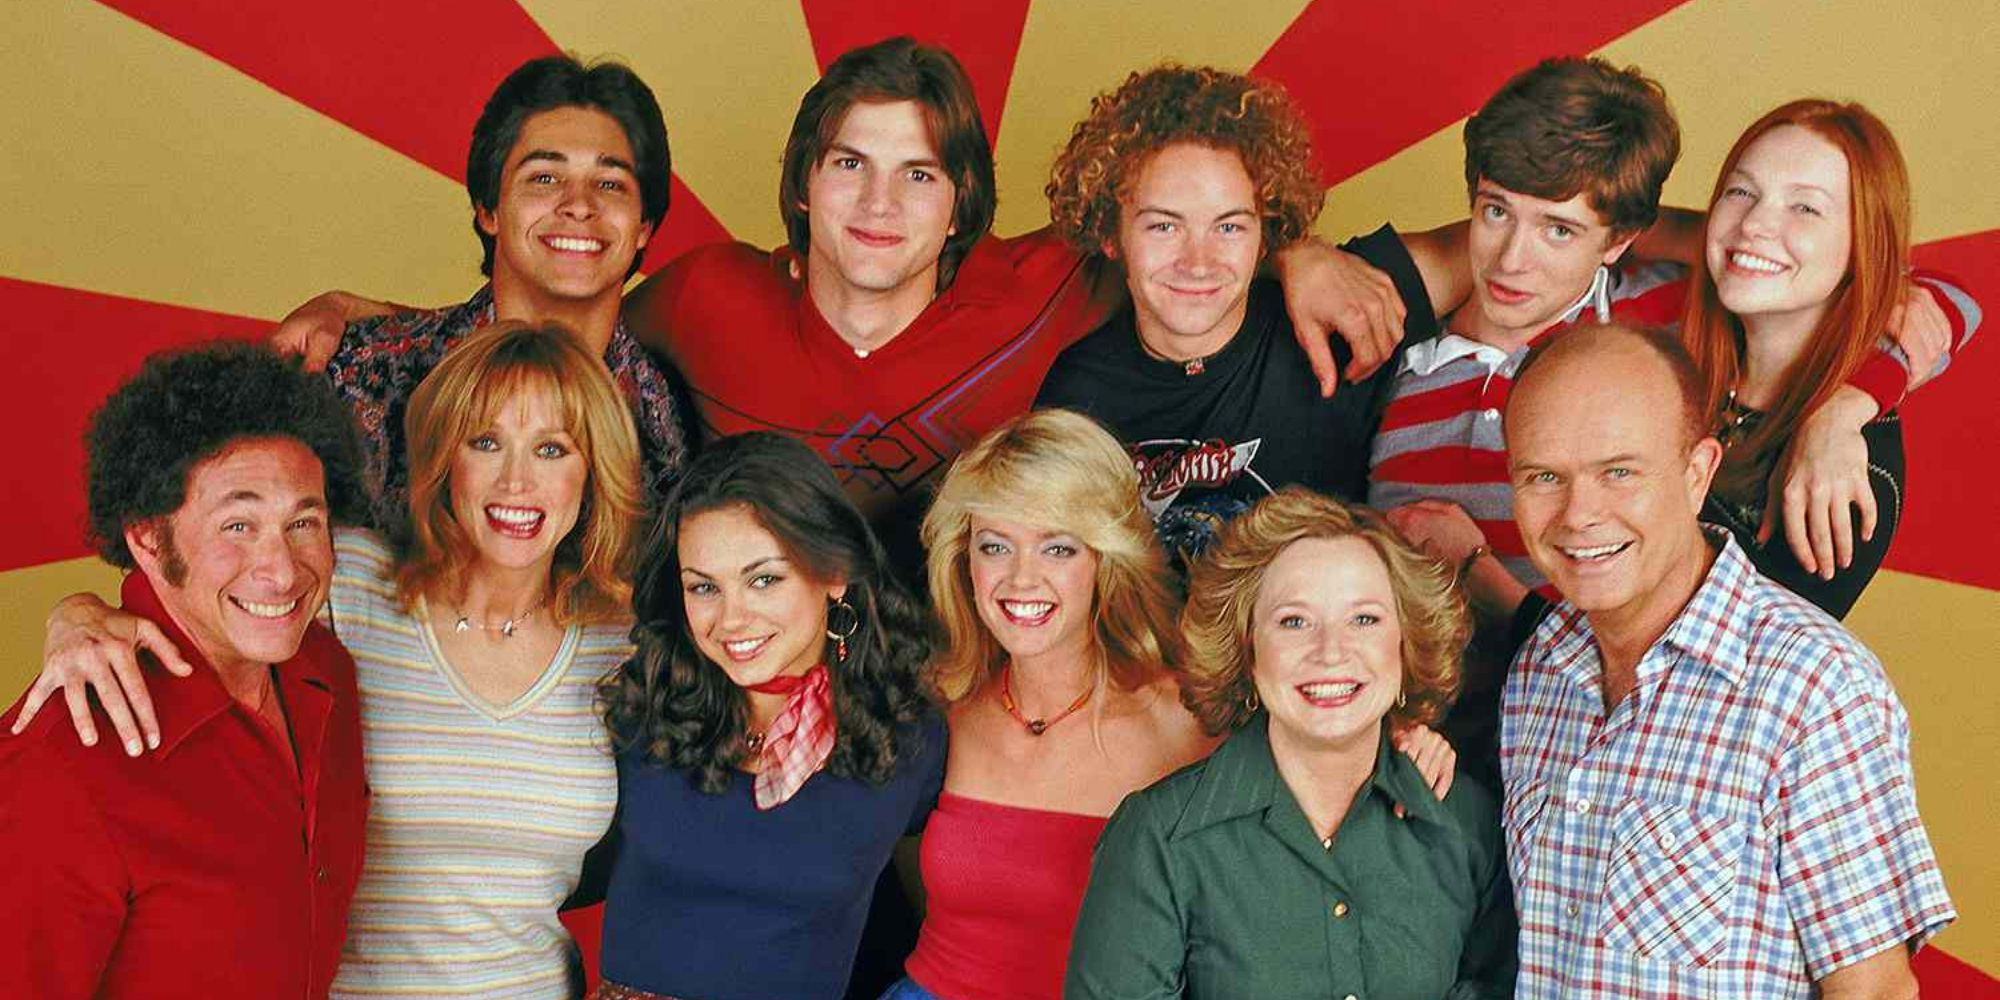 The whole cast of That 70s Show coming together, huddling, posing together